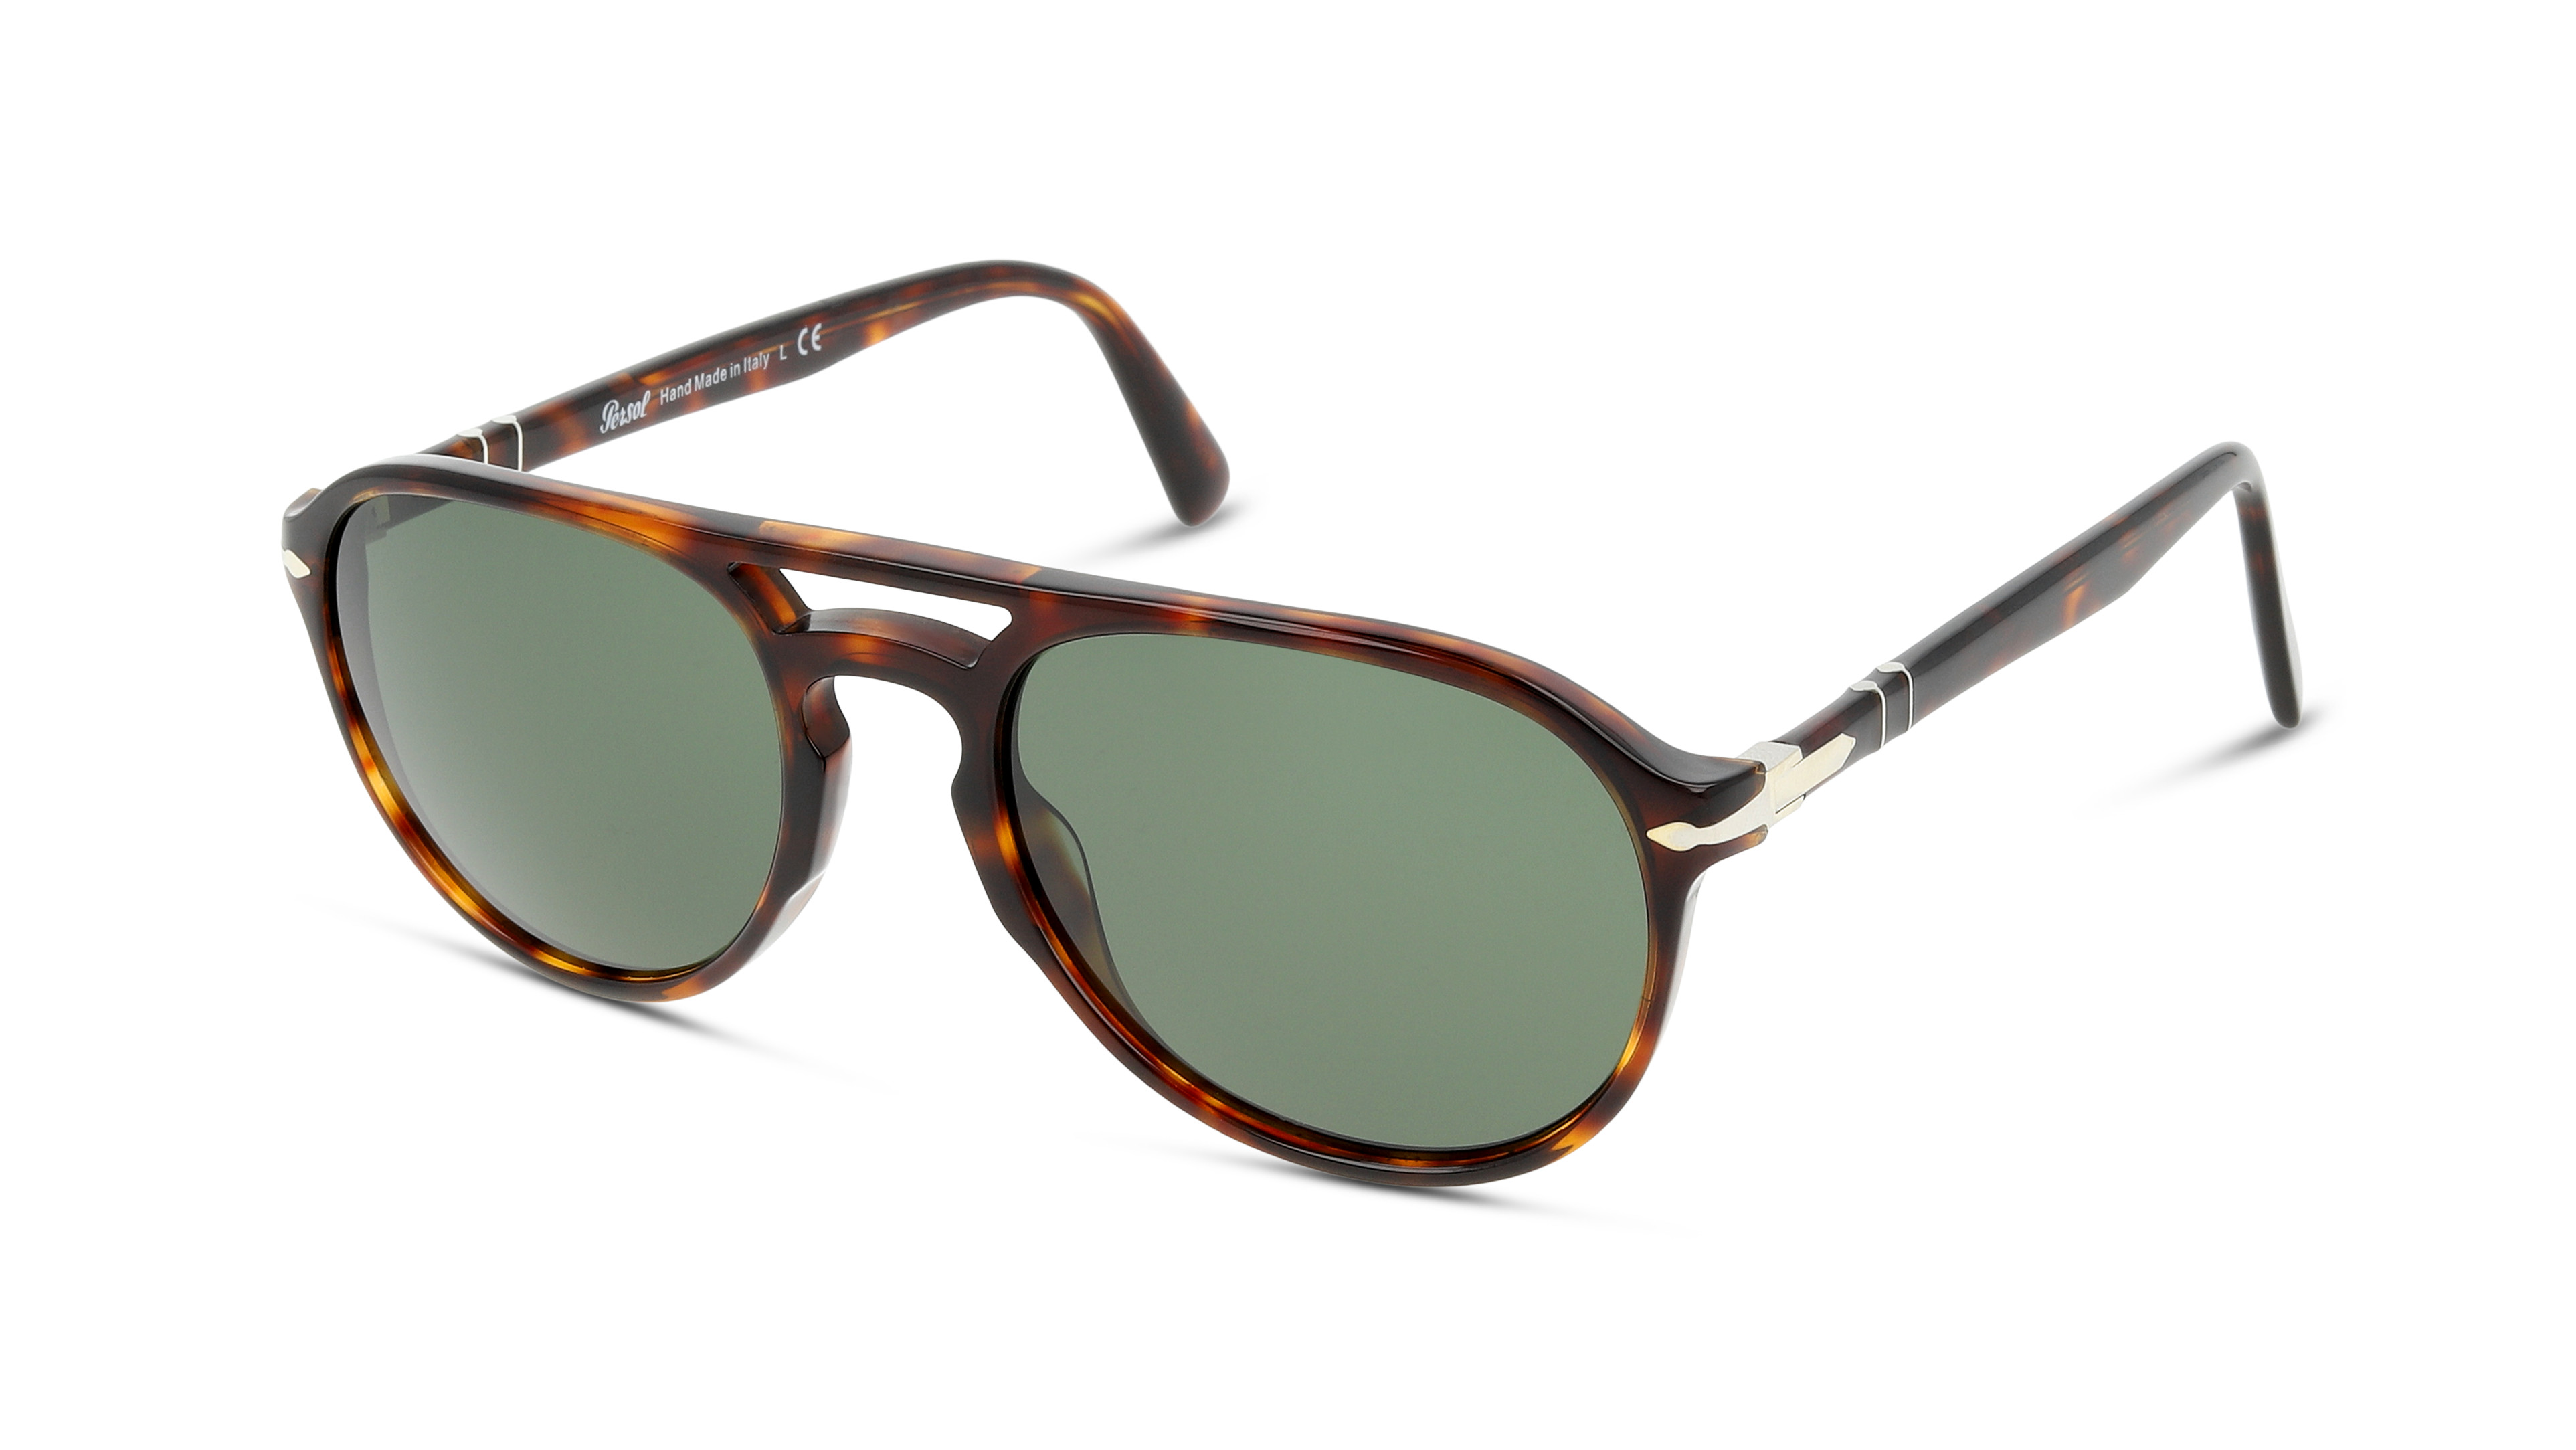 [products.image.angle_left01] Persol 0PO3235S 24/31 Sonnenbrille